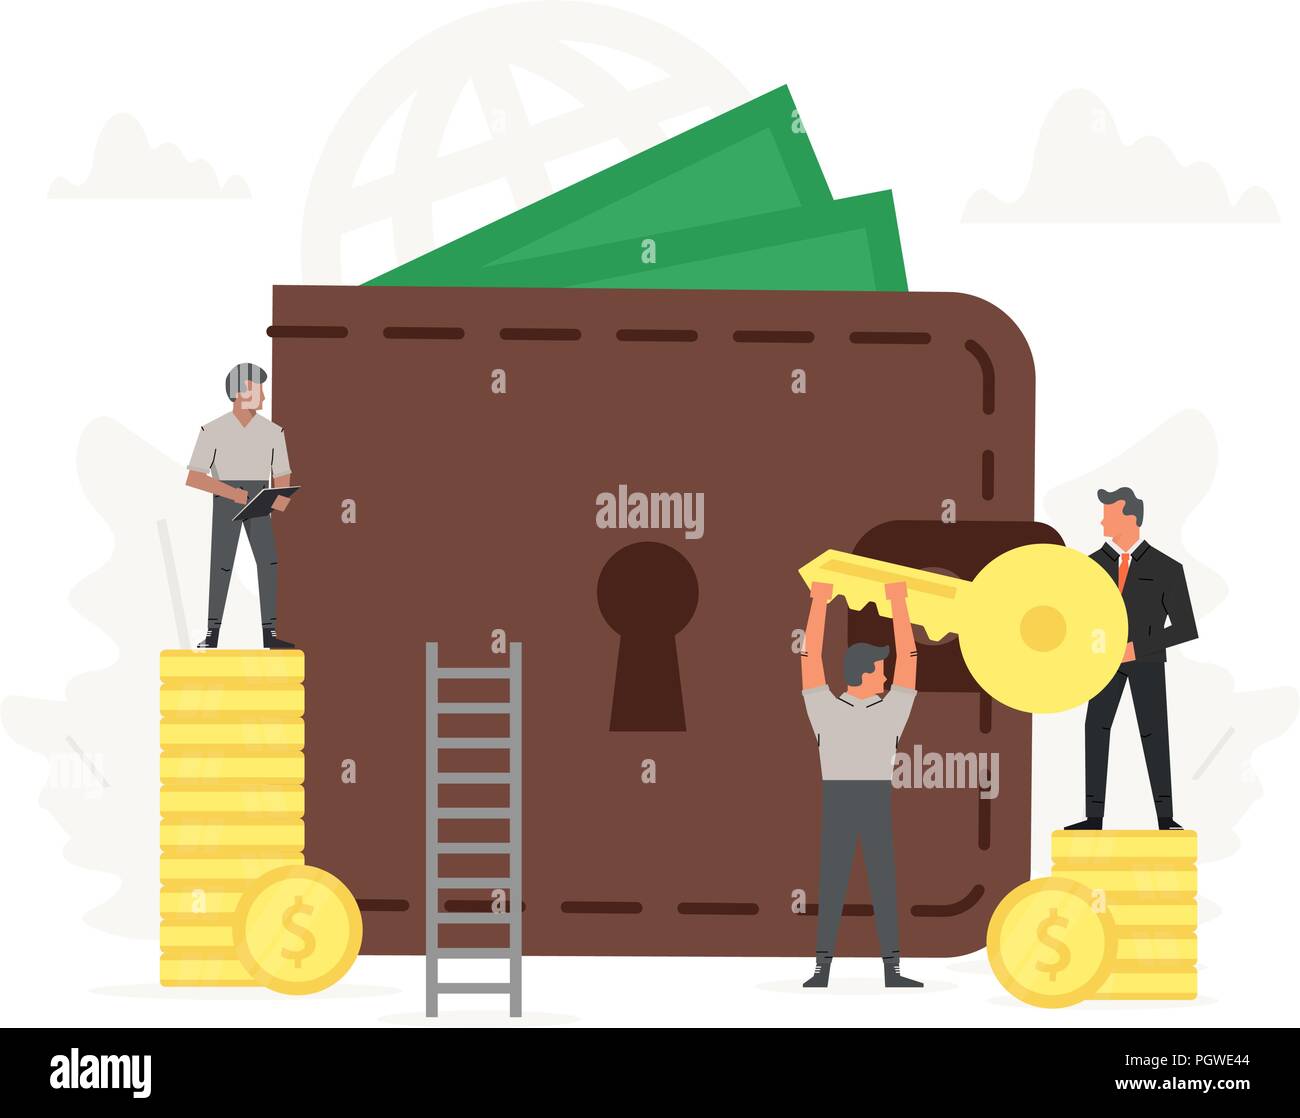 Large wallet and coins with small working people around it. Investment, saving money, concept of online payments, open purse illustration. Stock Vector